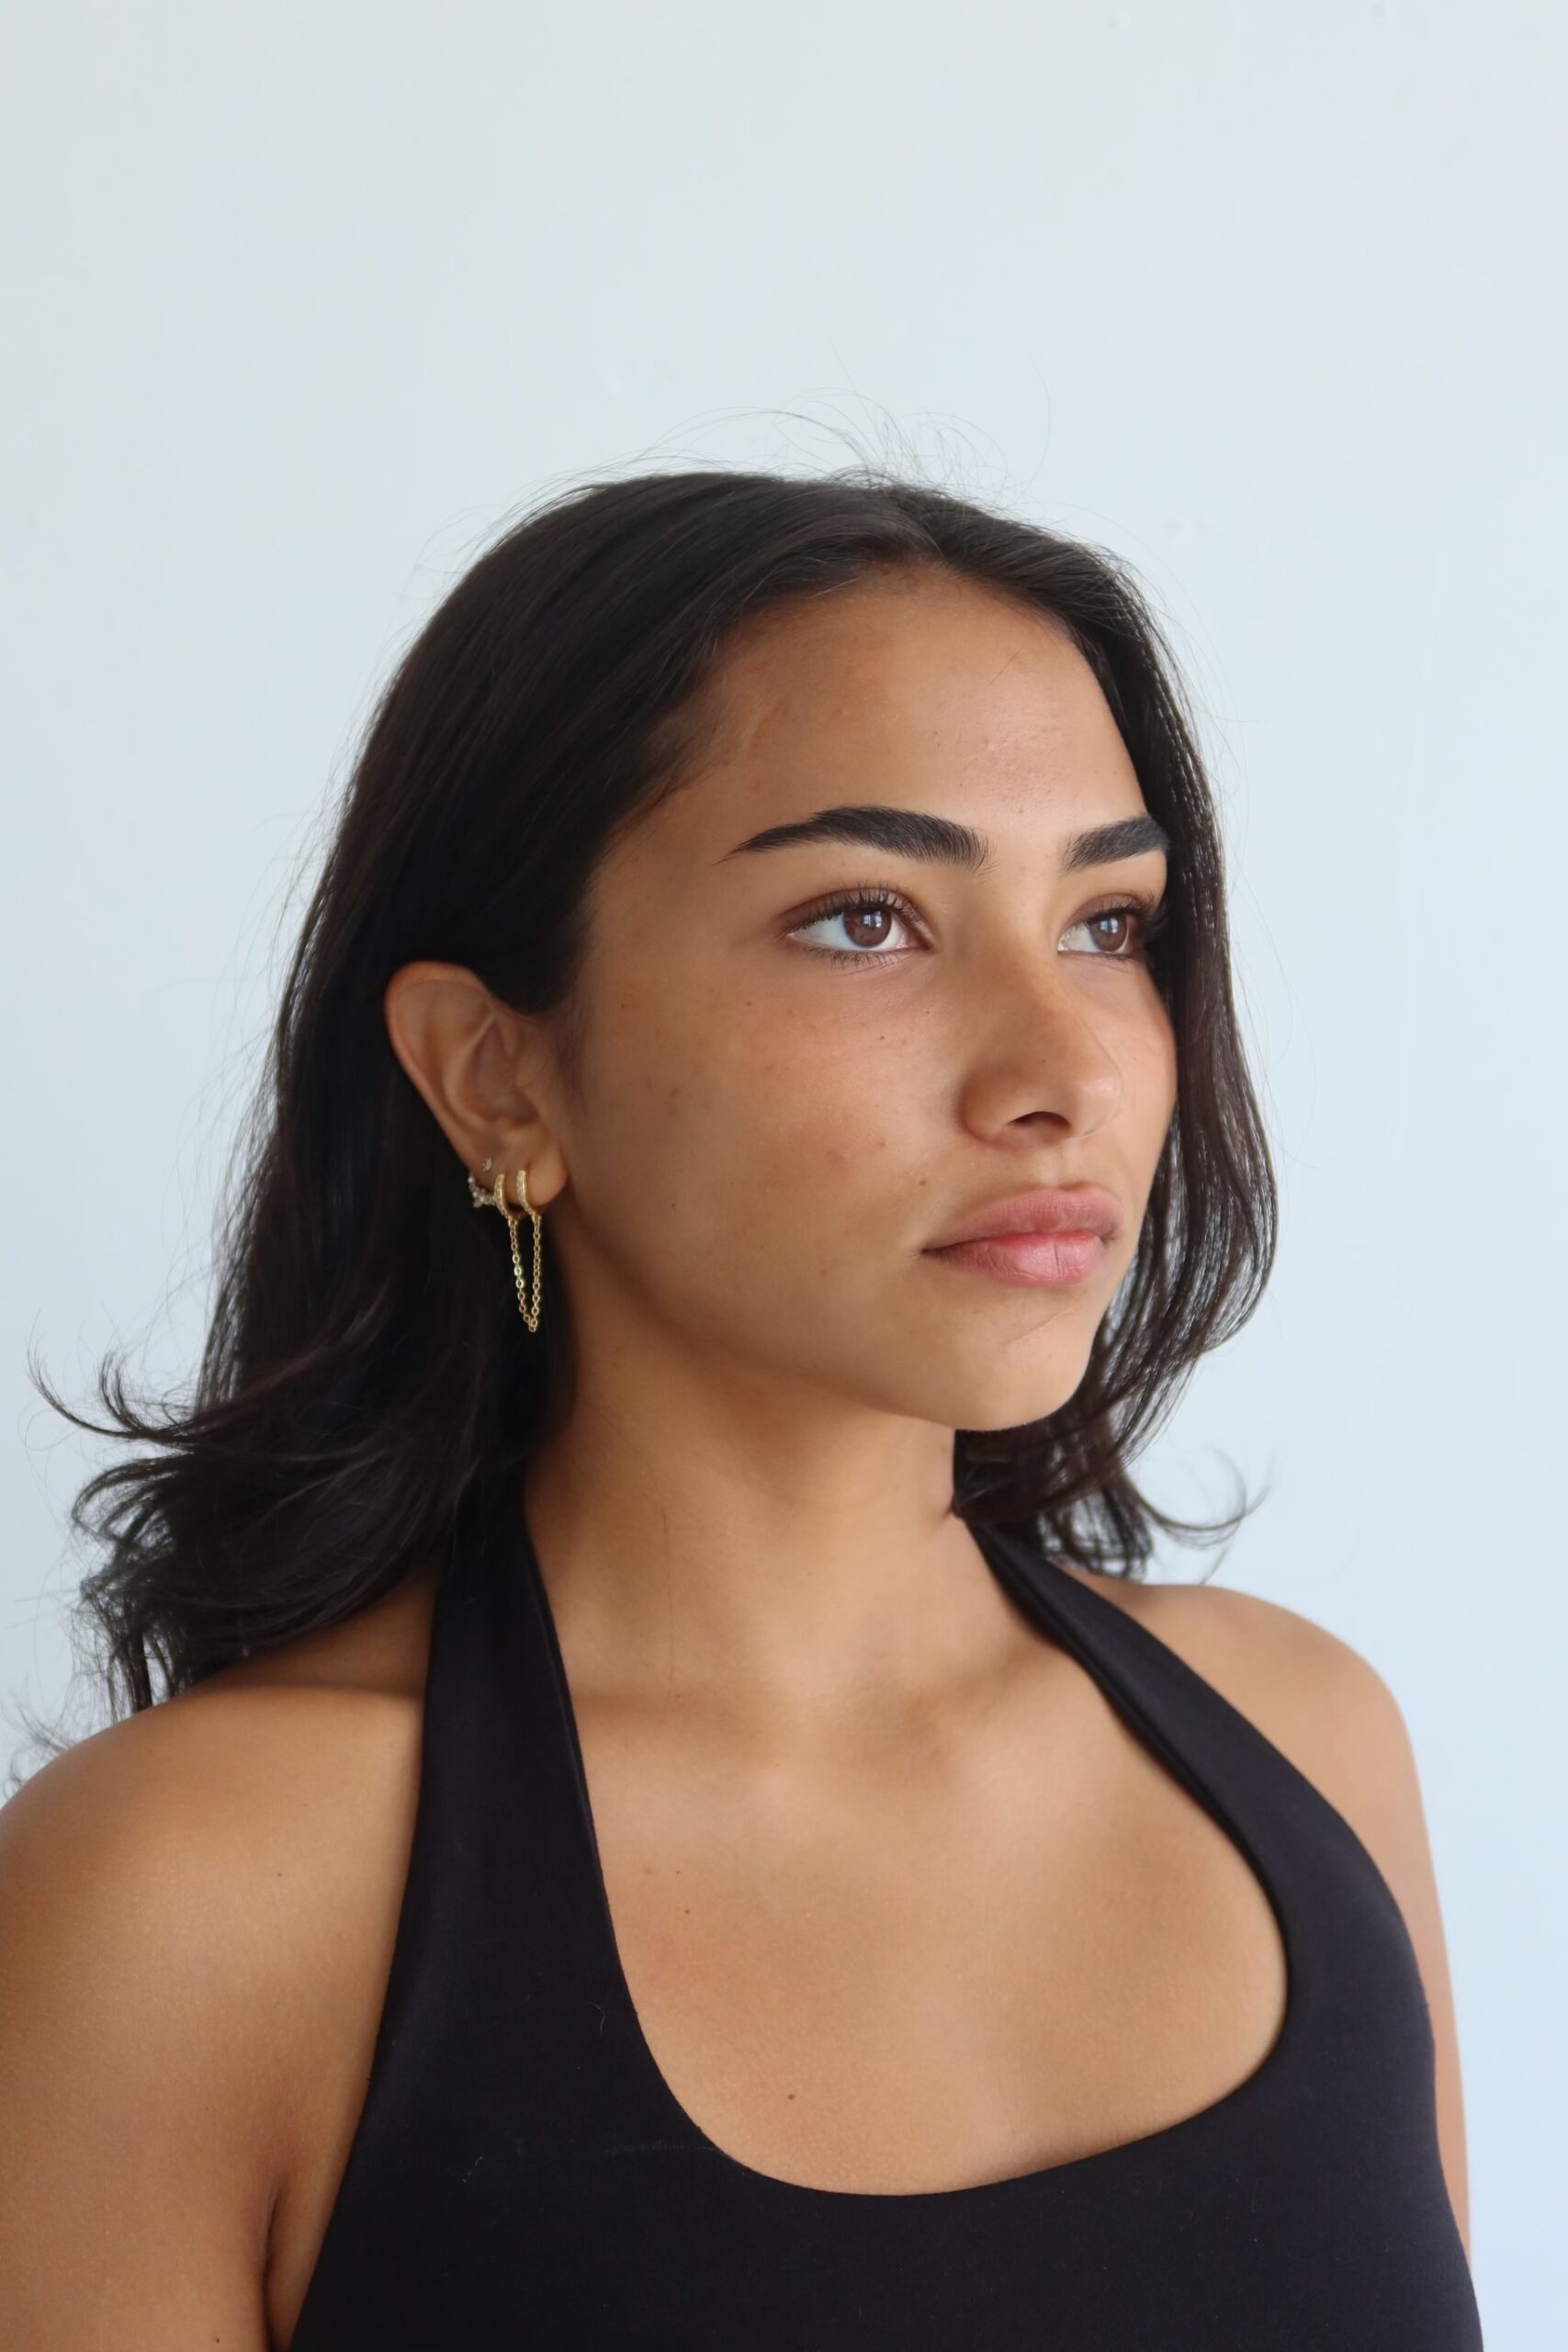 Profile shot of girl looking past the camera against a white backdrop; model wears a black halter top, dangling gold earrings, and light to no makeup. Tan skin, dark brown curly hair.